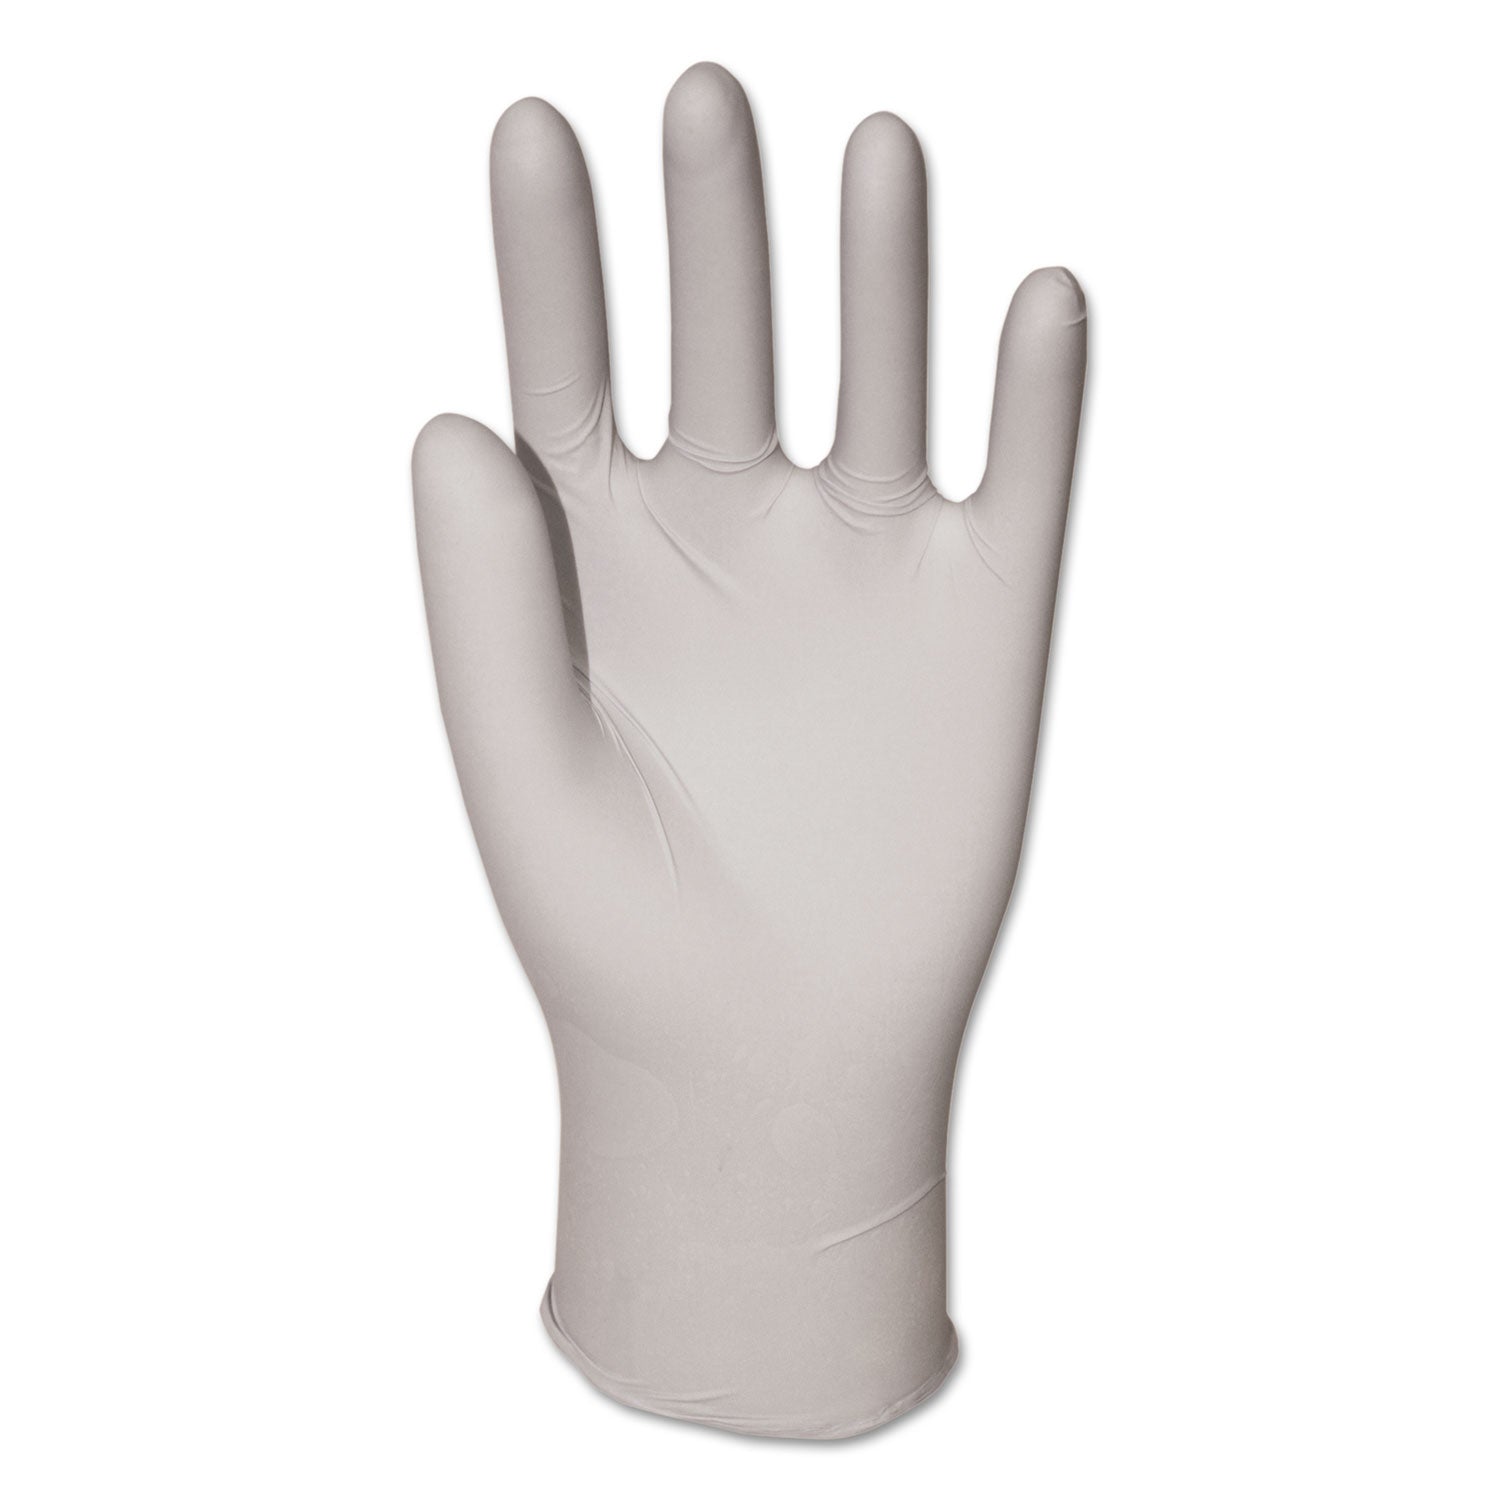 General-Purpose Vinyl Gloves, Powdered, Small, Clear, 2.6 mil, 1,000/Carton - 